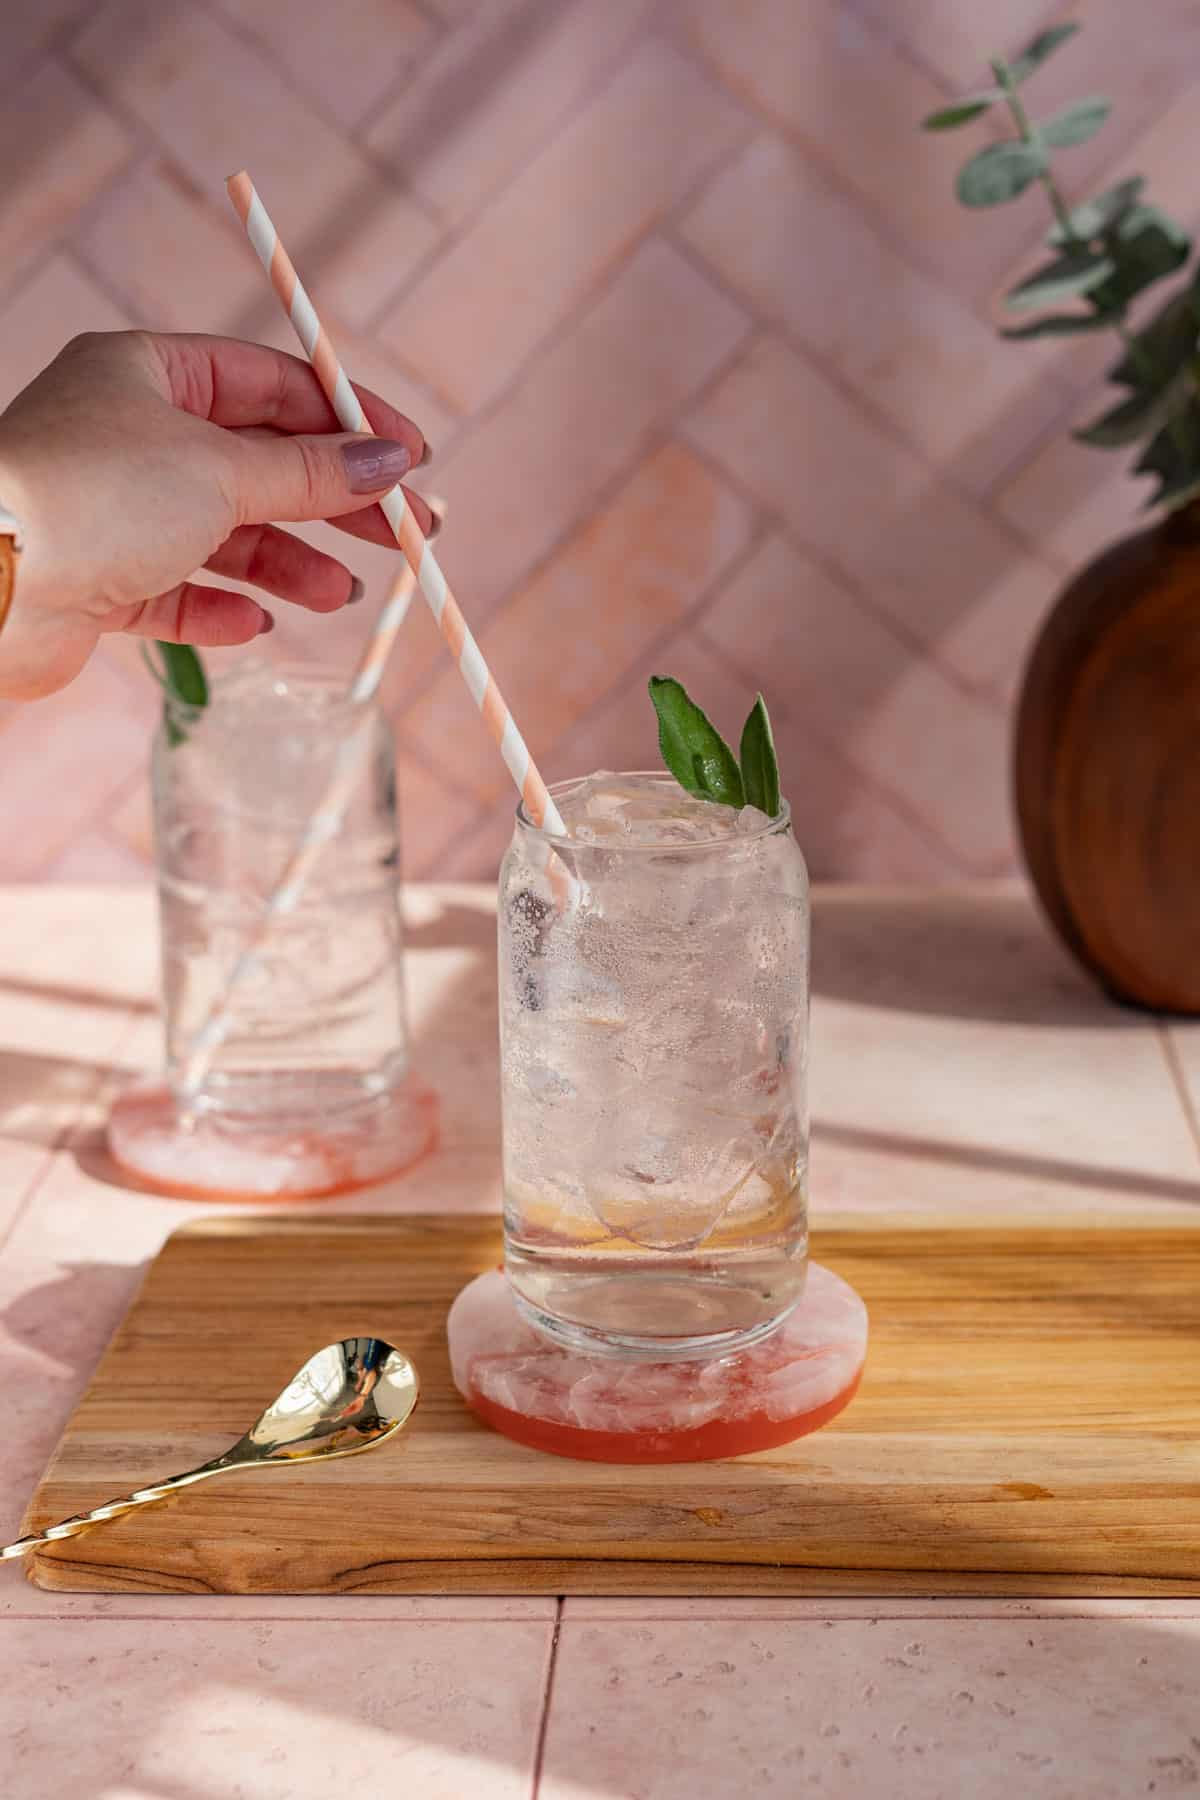 A hand from out of frame is adding a striped paper straw to a homemade sage soda.